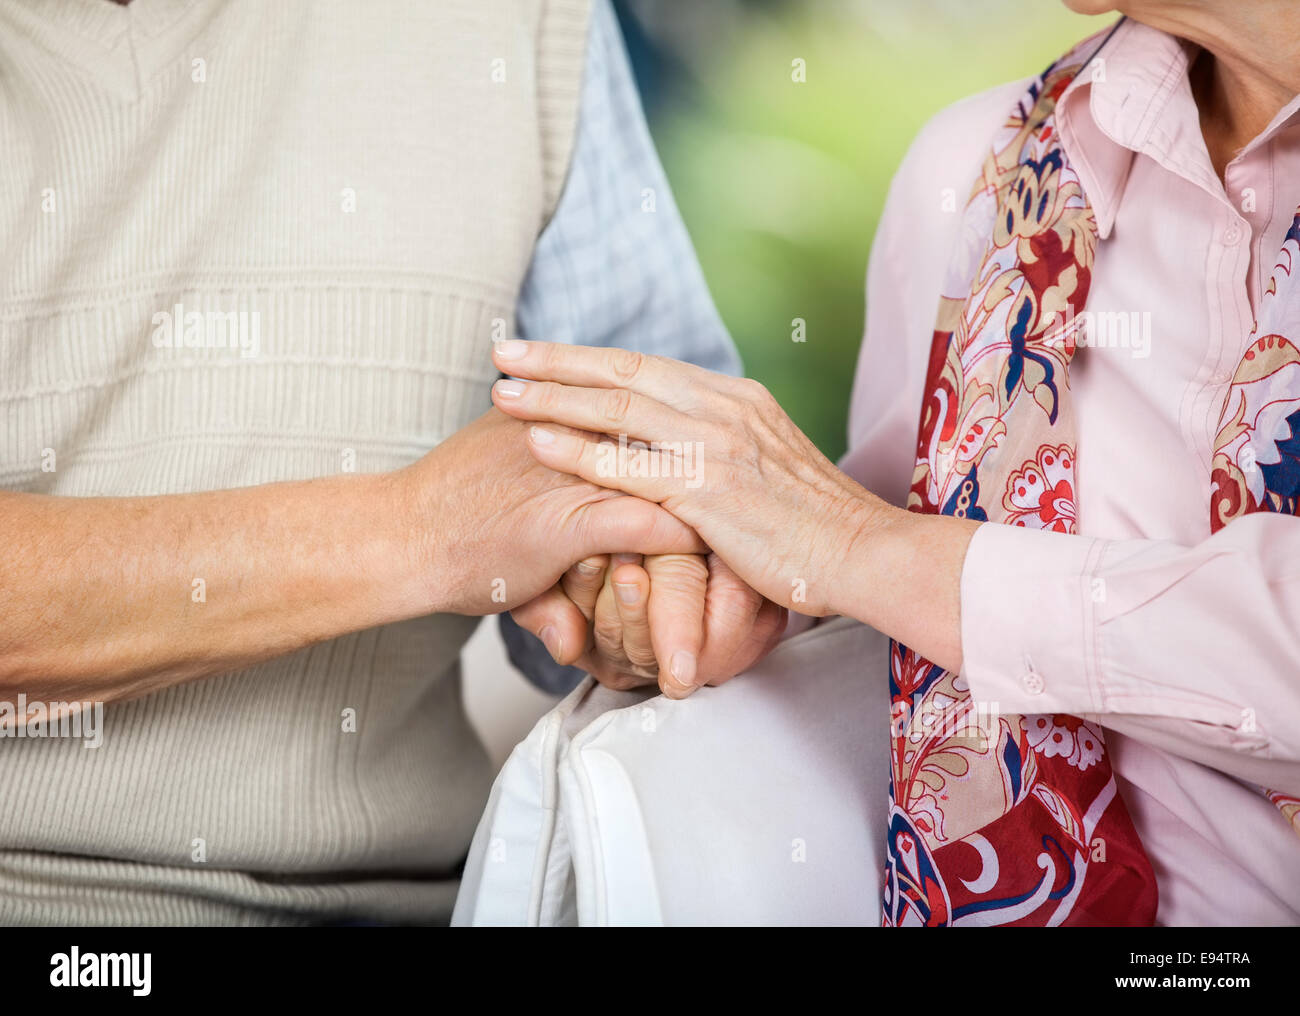 Senior Couple Holding Hands While Sitting On Chairs Stock Photo